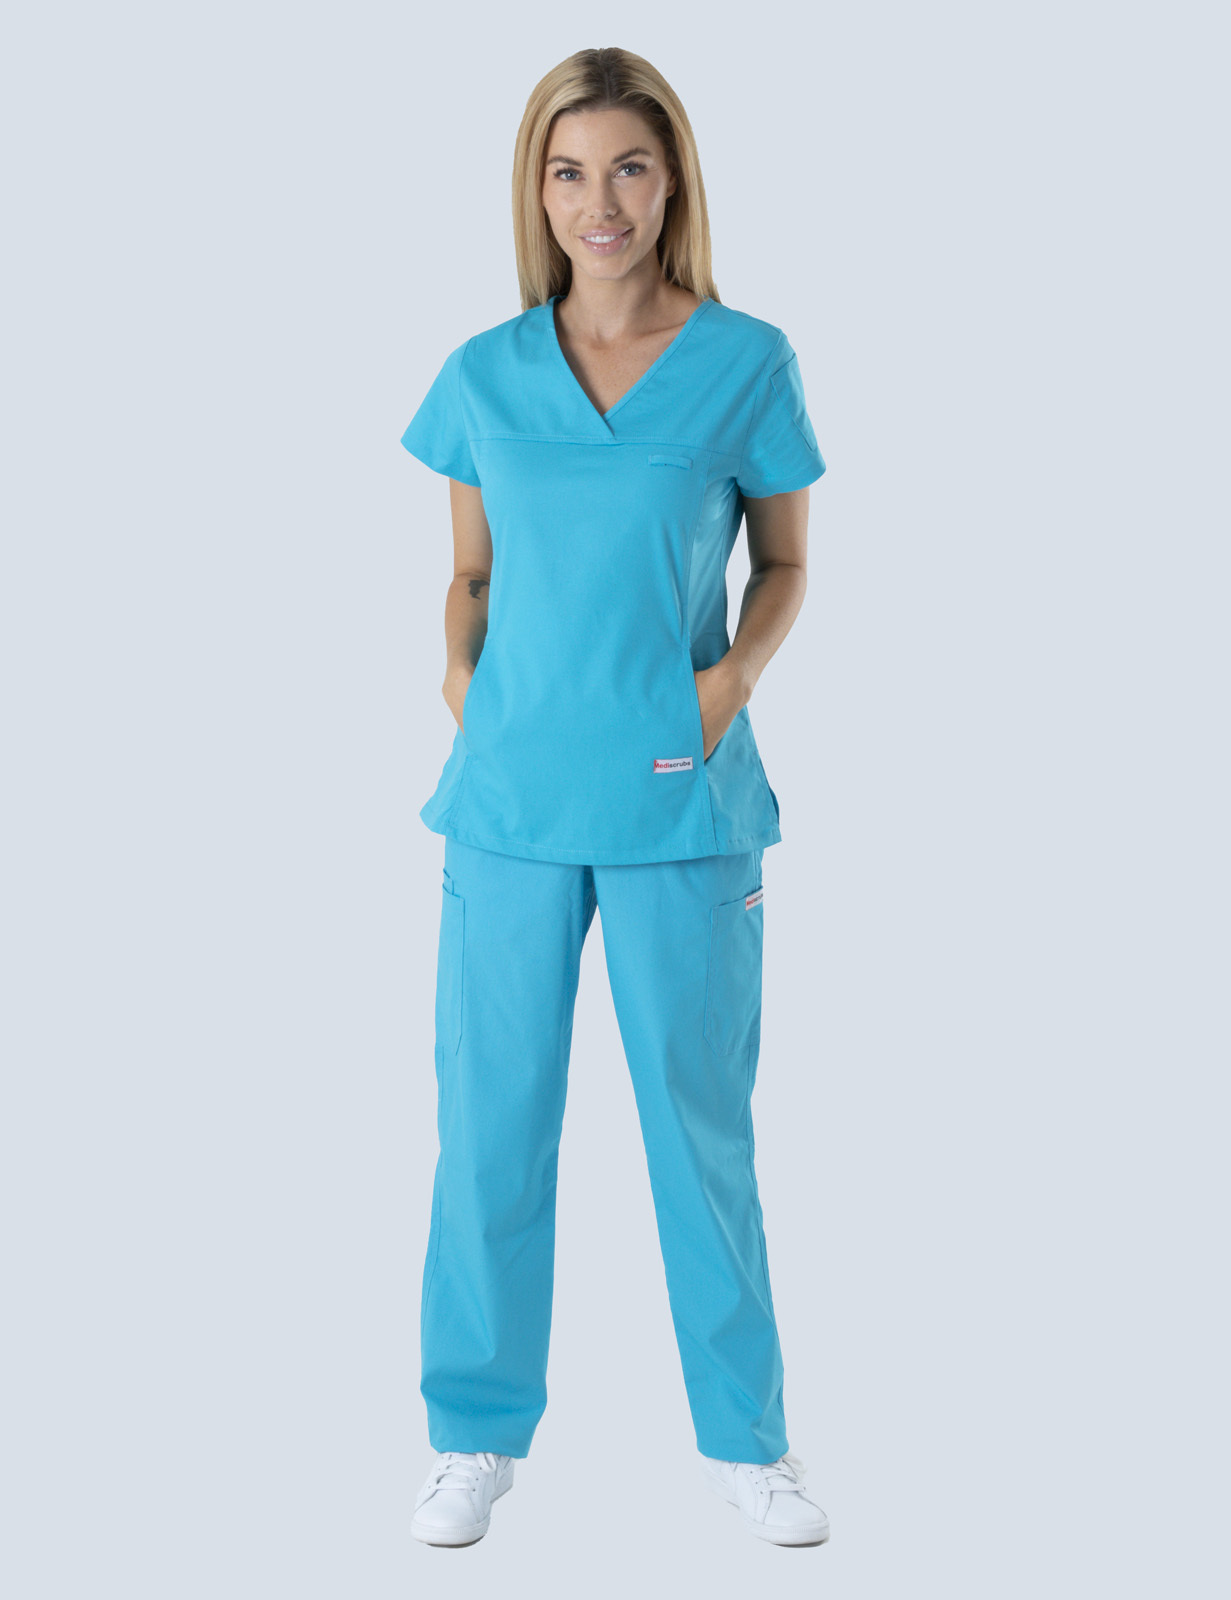 Gympie Hospital - Enrolled Nurse (Women's Fit Solid Scrub Top and Cargo Pants in Aqua incl Logos)